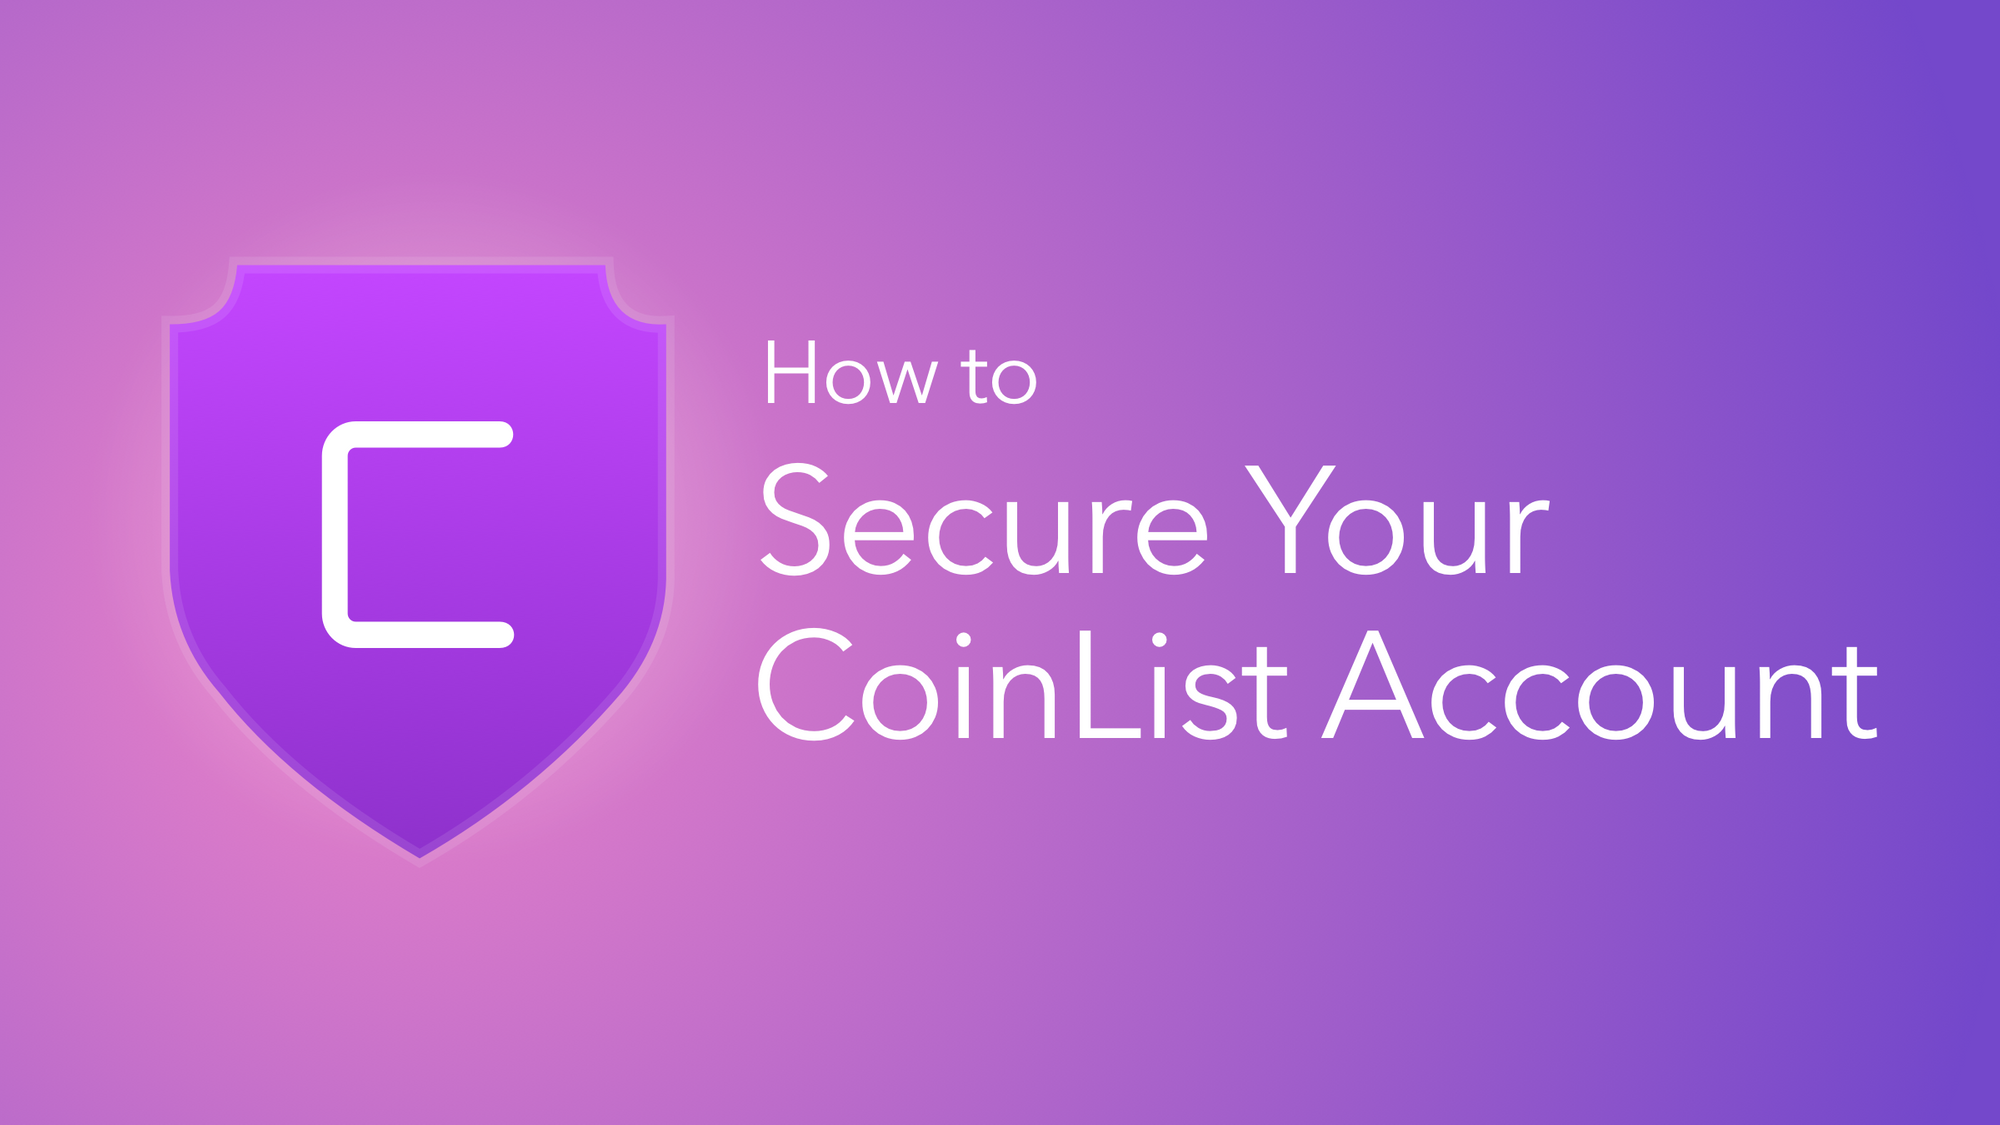 How to Secure Your CoinList Account And Avoid Scams